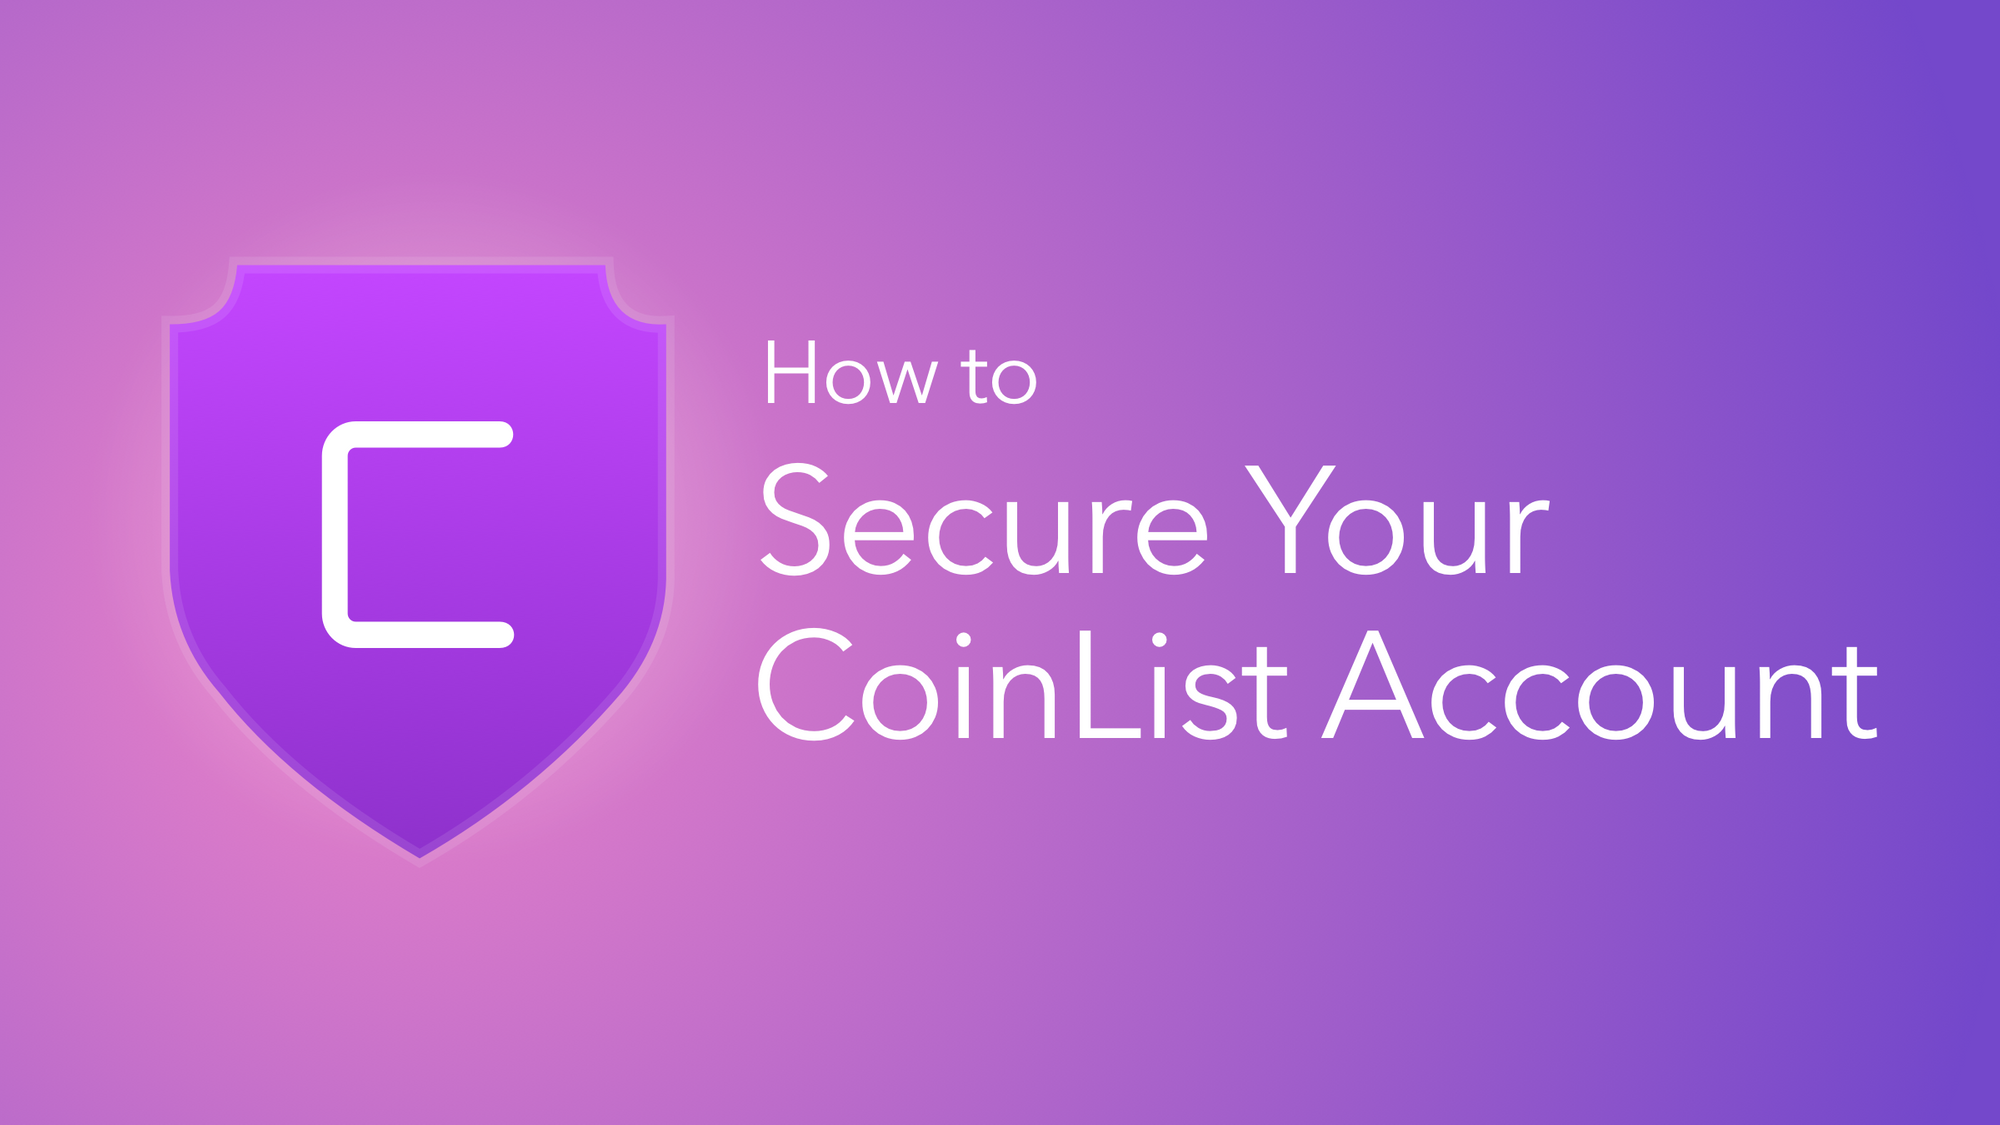 How to Secure Your CoinList Account And Avoid Scams